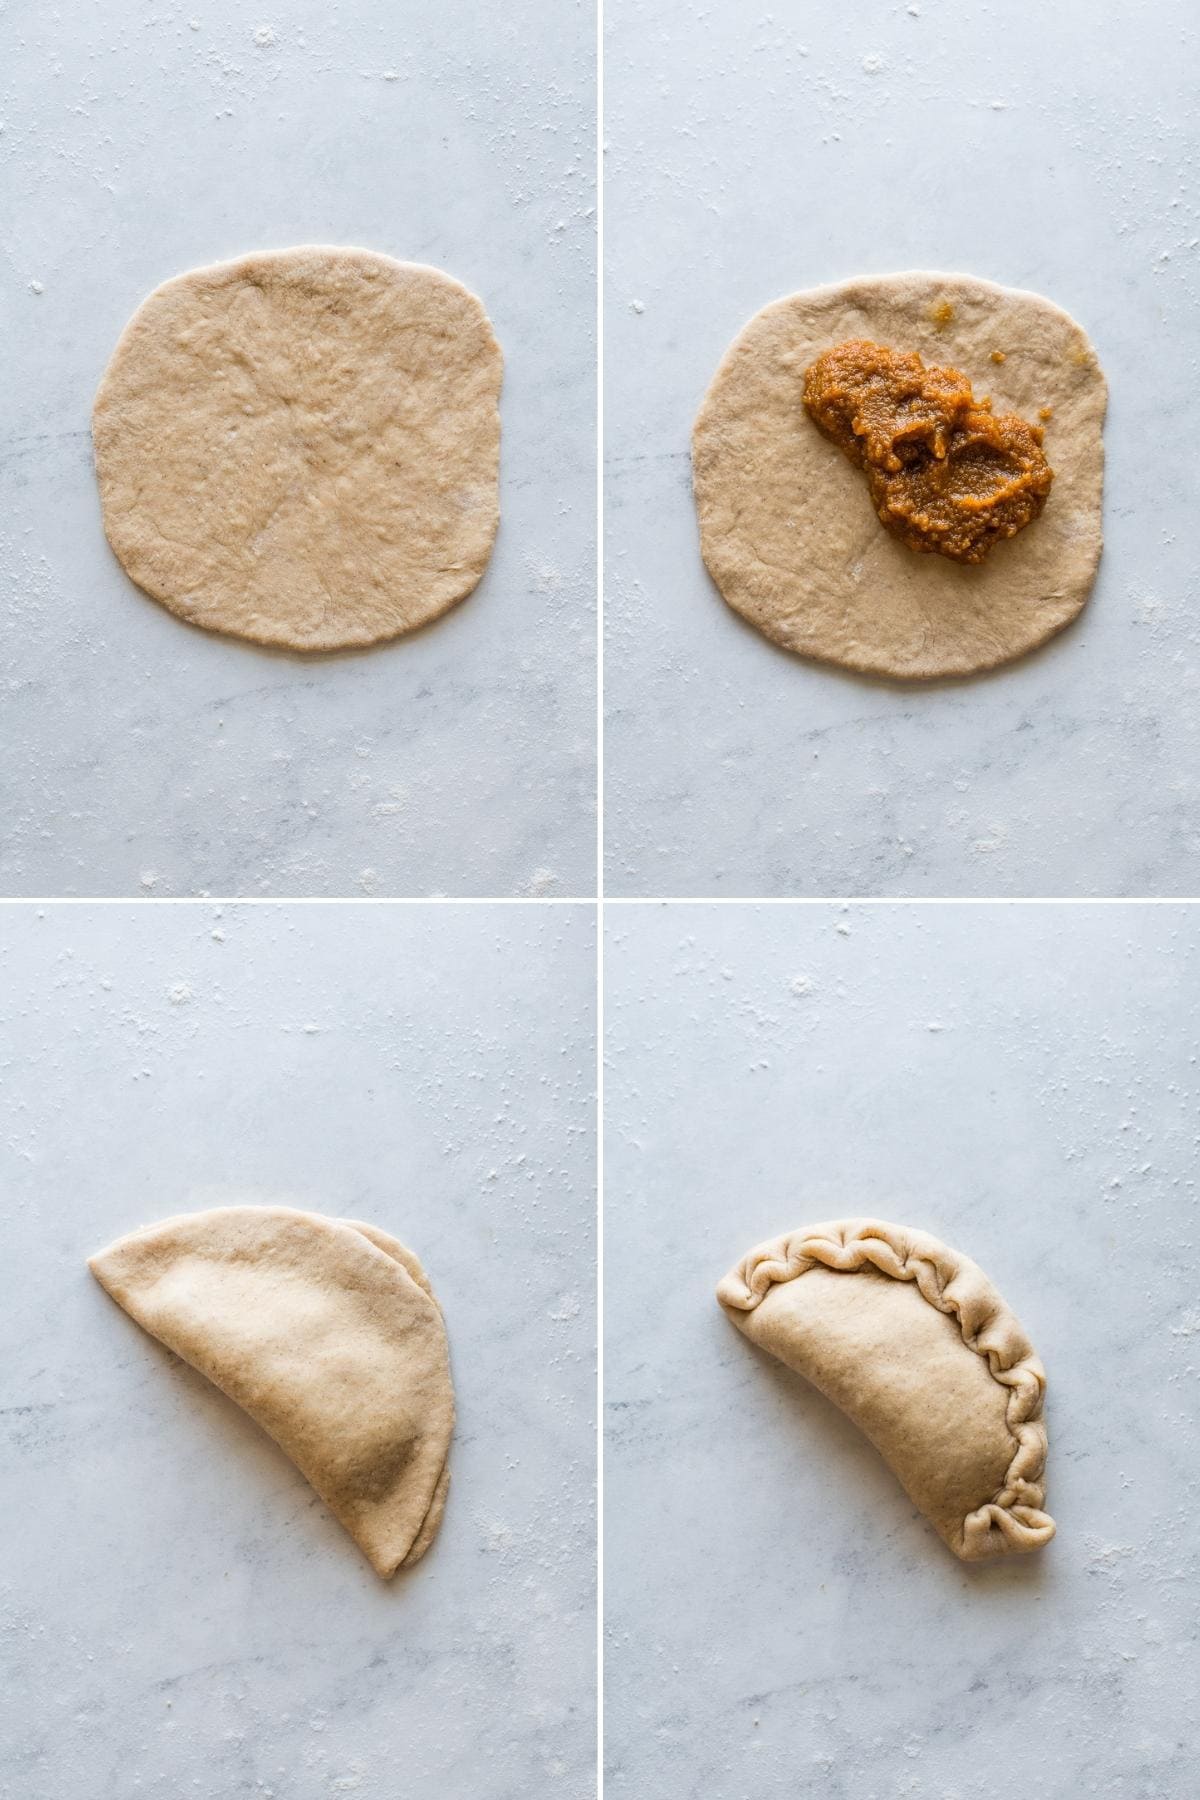 Step by step photos showing how to close and seal empanadas.